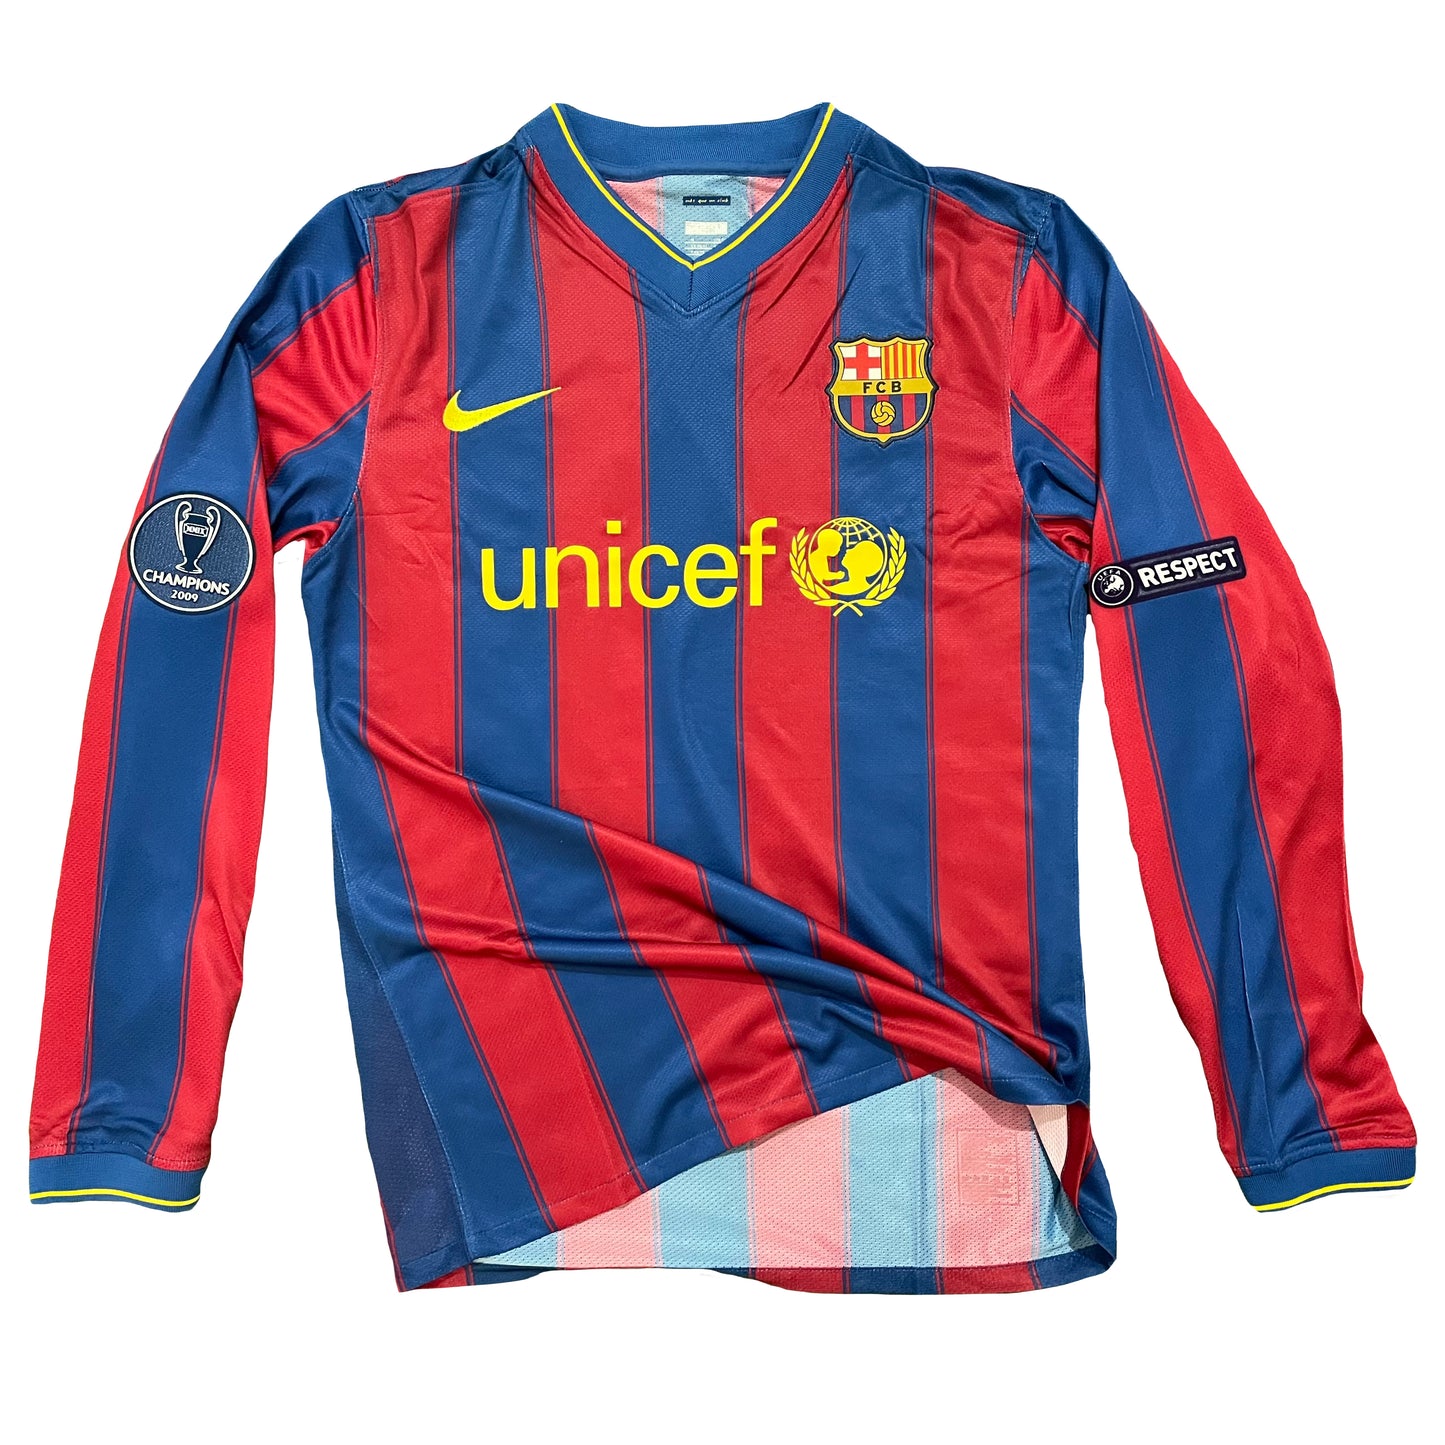 2009-2010 FC Barcelona Player Issue home shirt #10 Messi (M)